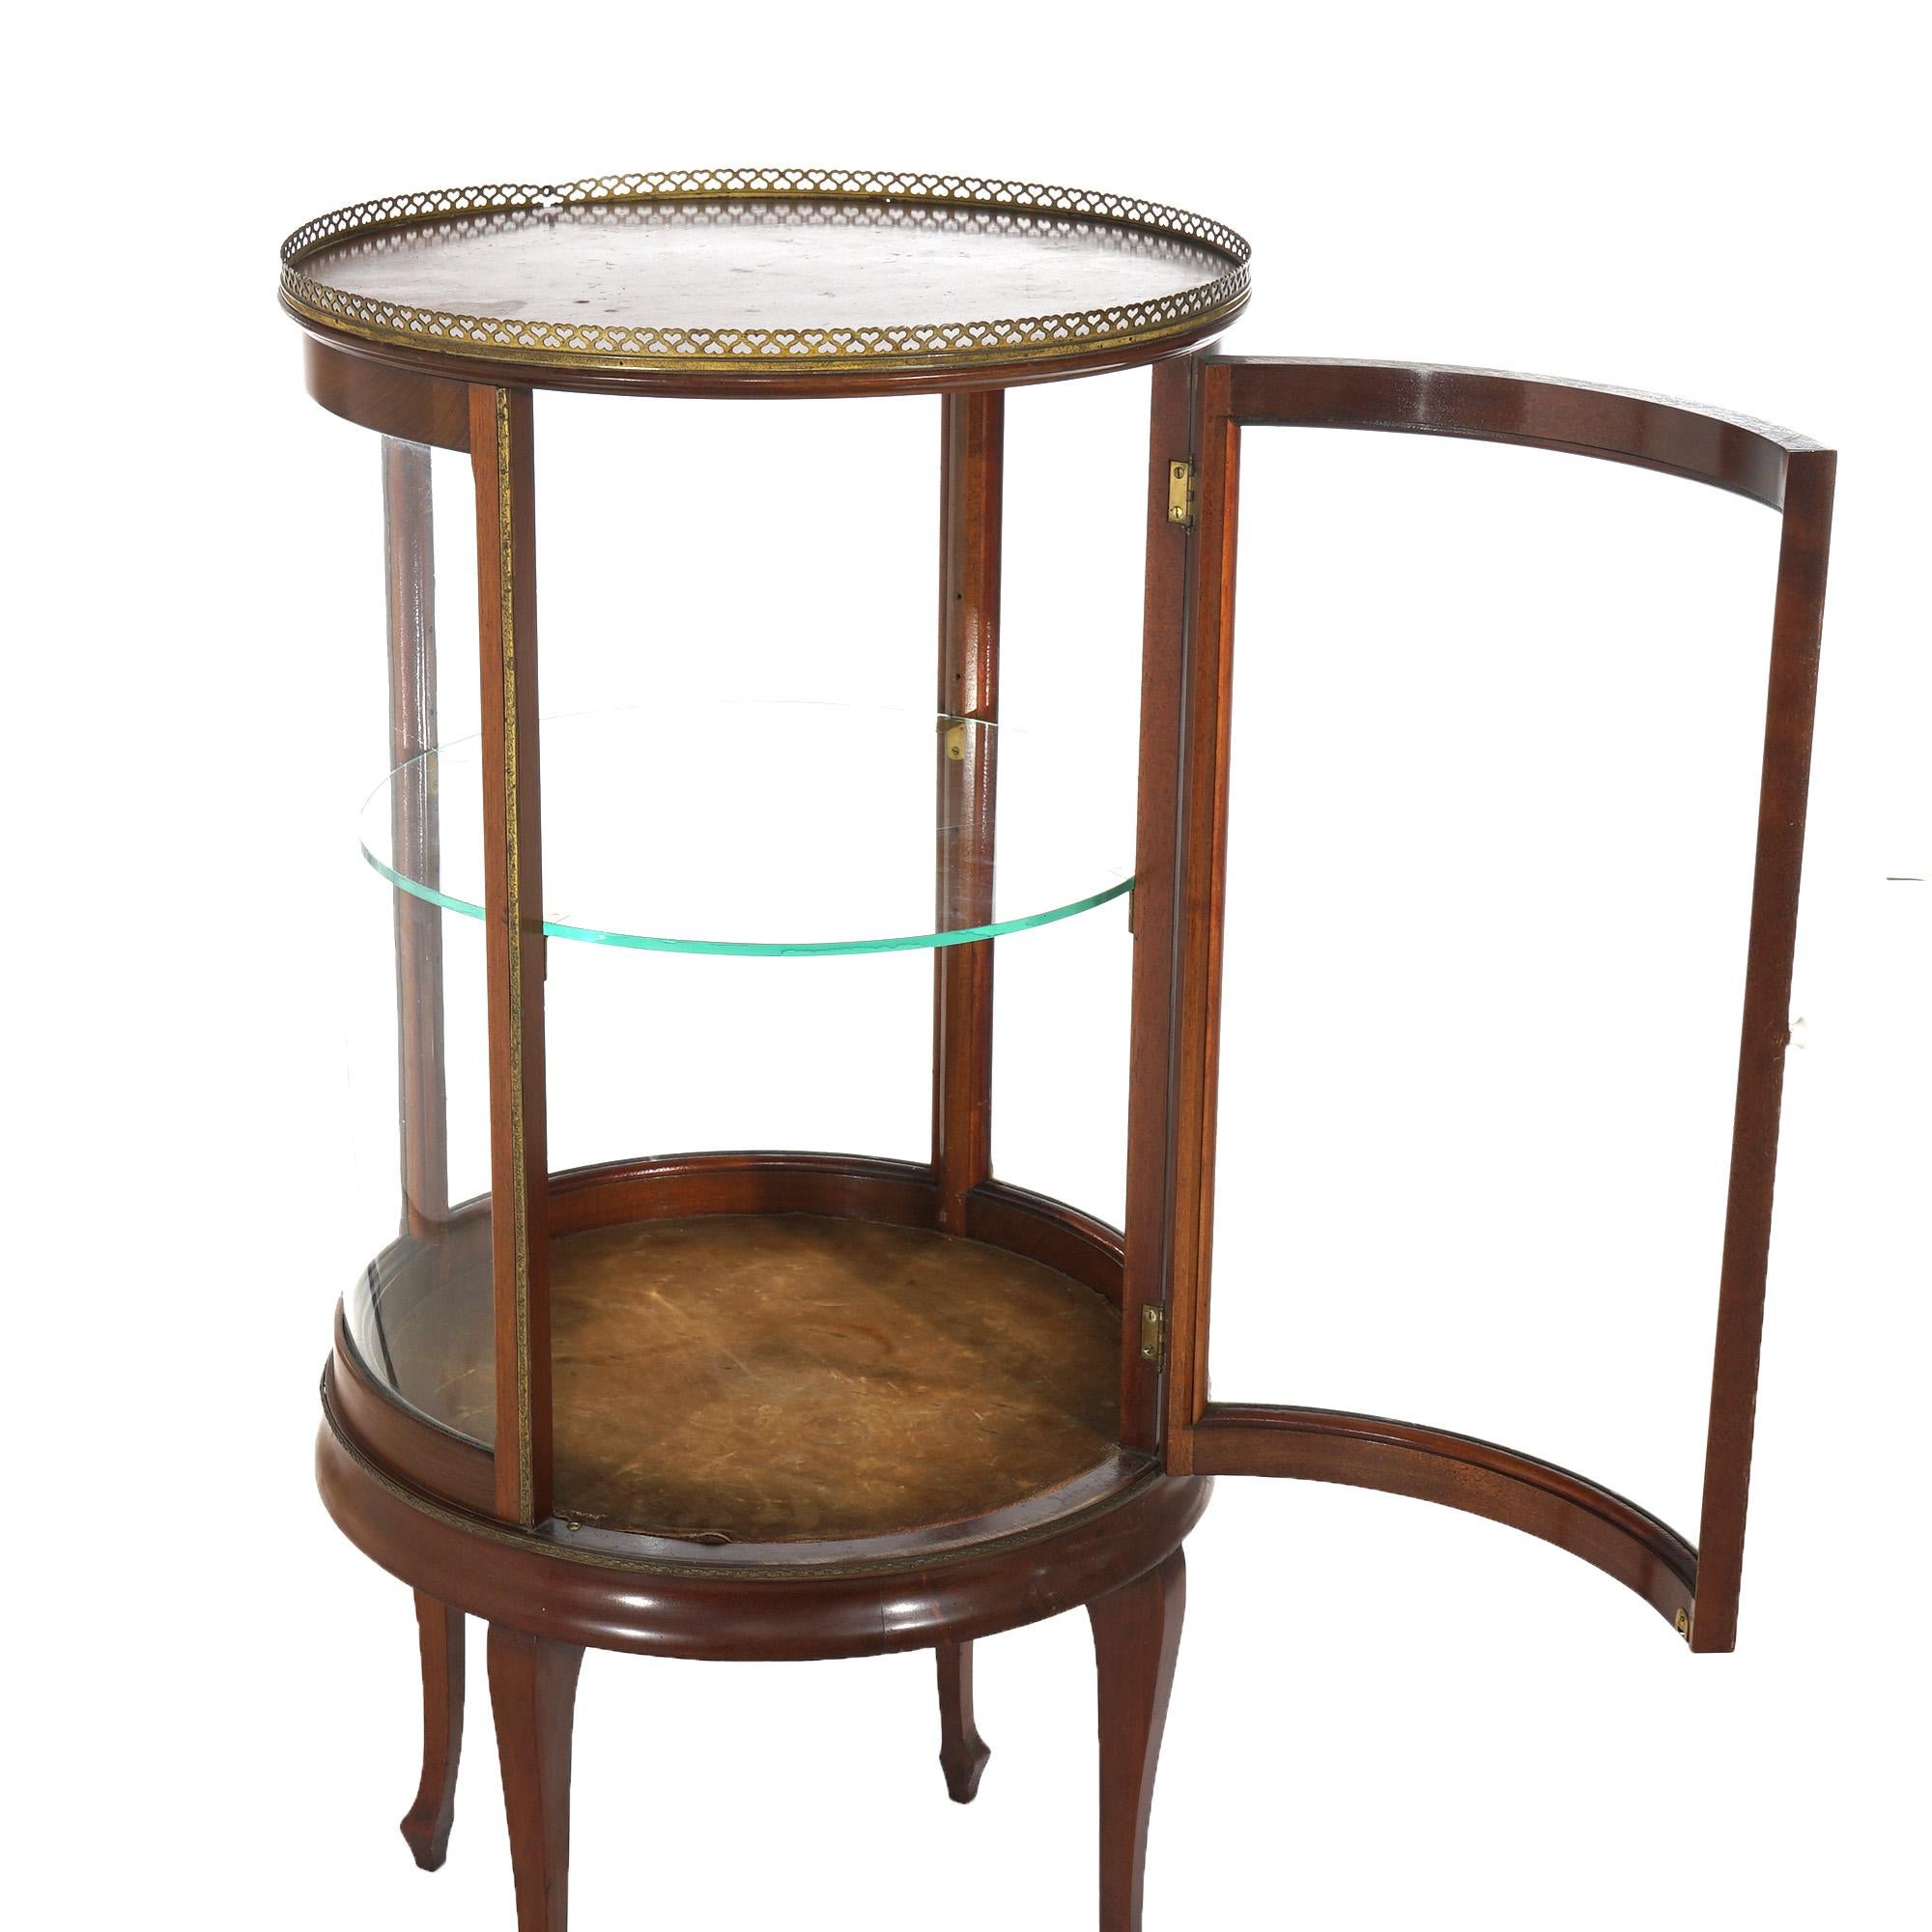 20th Century Antique French Style Round Mahogany Display Vitrine with Foliate Ormolu C1900 For Sale